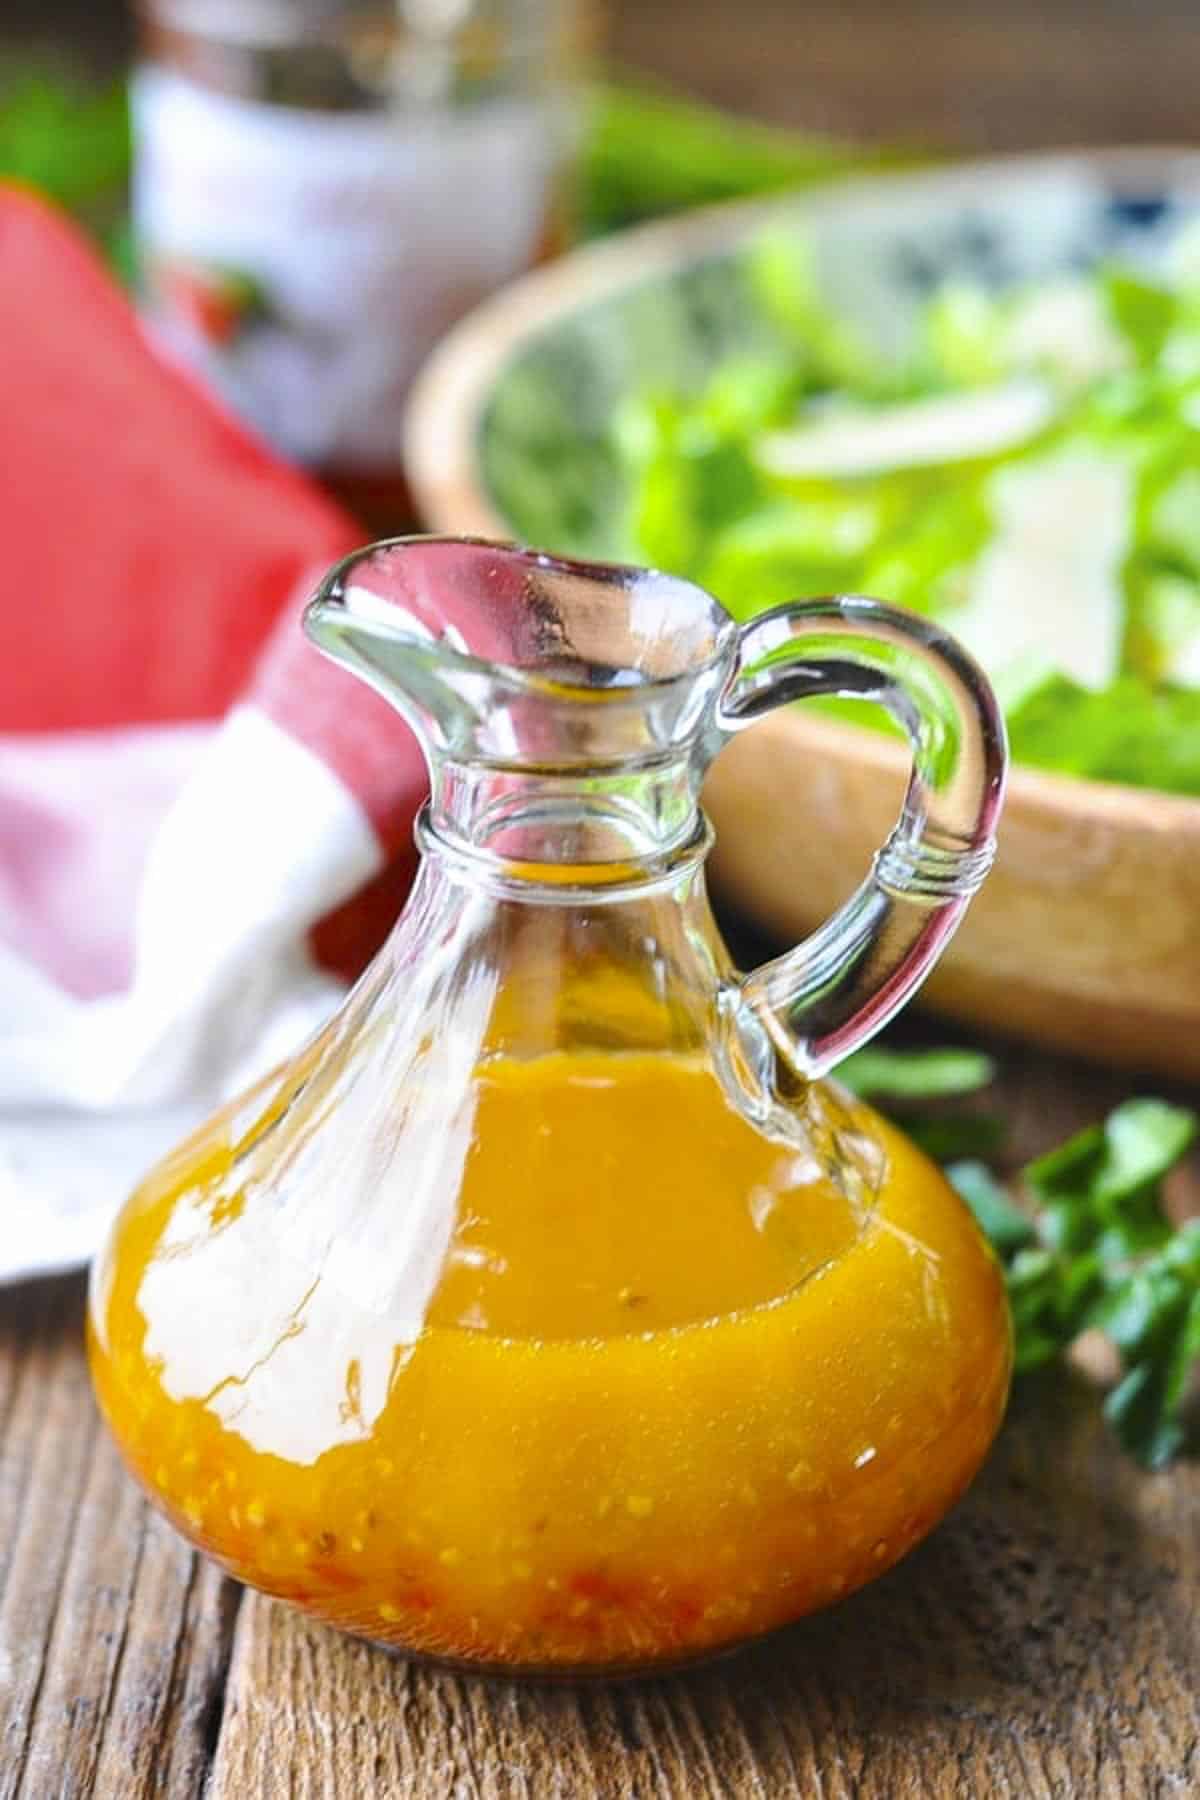 Bottle of homemade pepper jelly vinaigrette recipe on a wooden table with salad in the background.